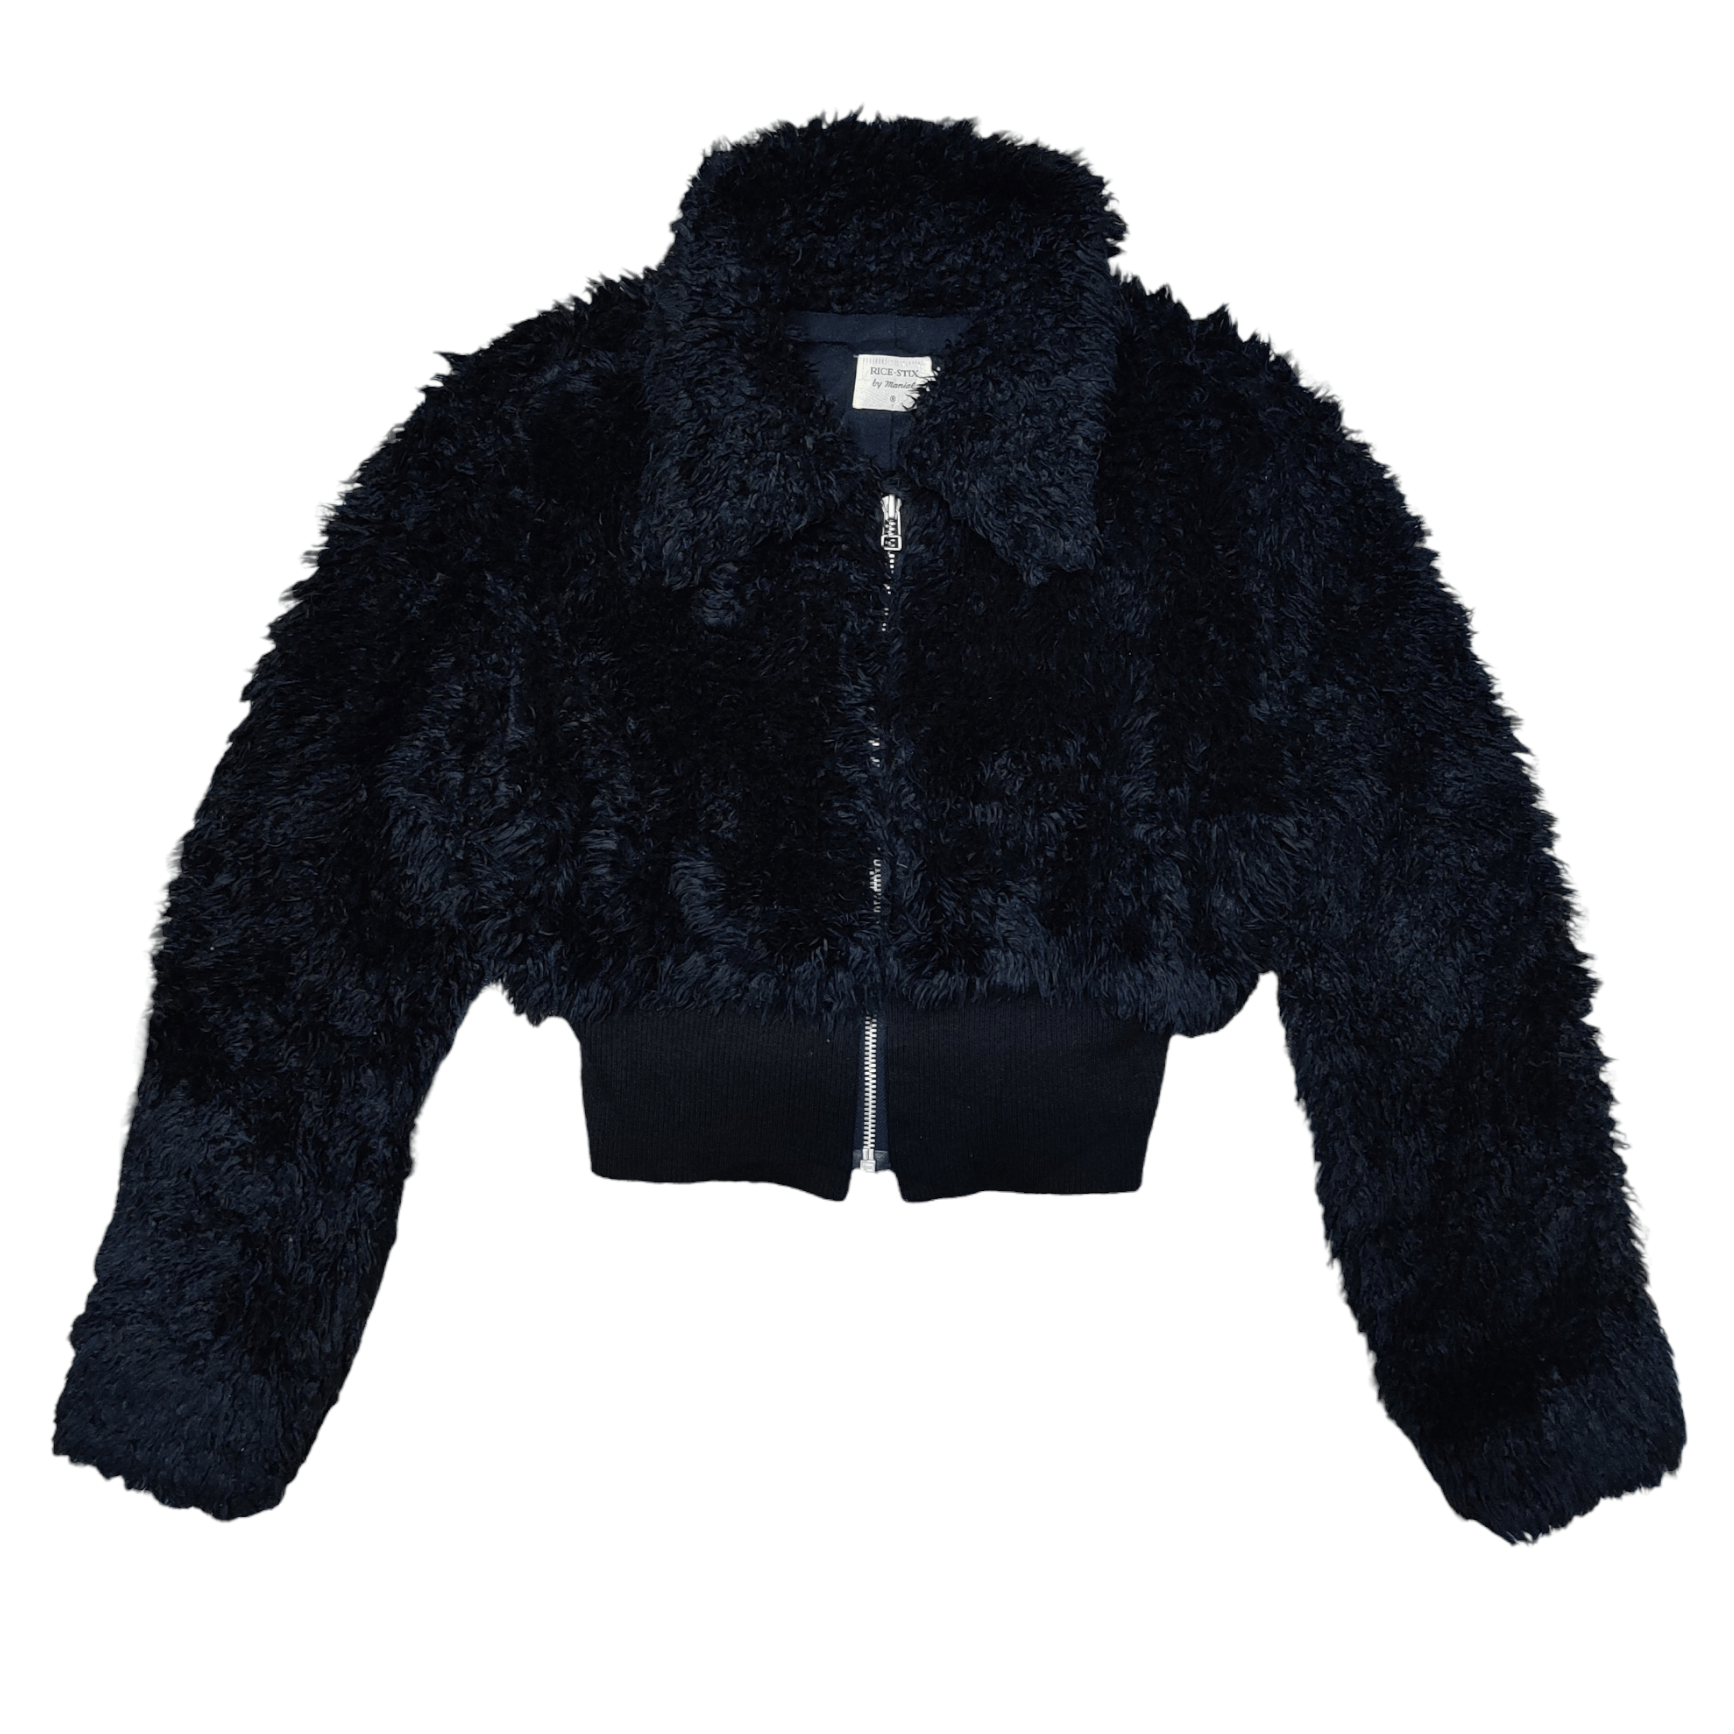 Archival Clothing - Vintage Japanese Brand Rice-Stix by Manial Fur Zip Up - 1